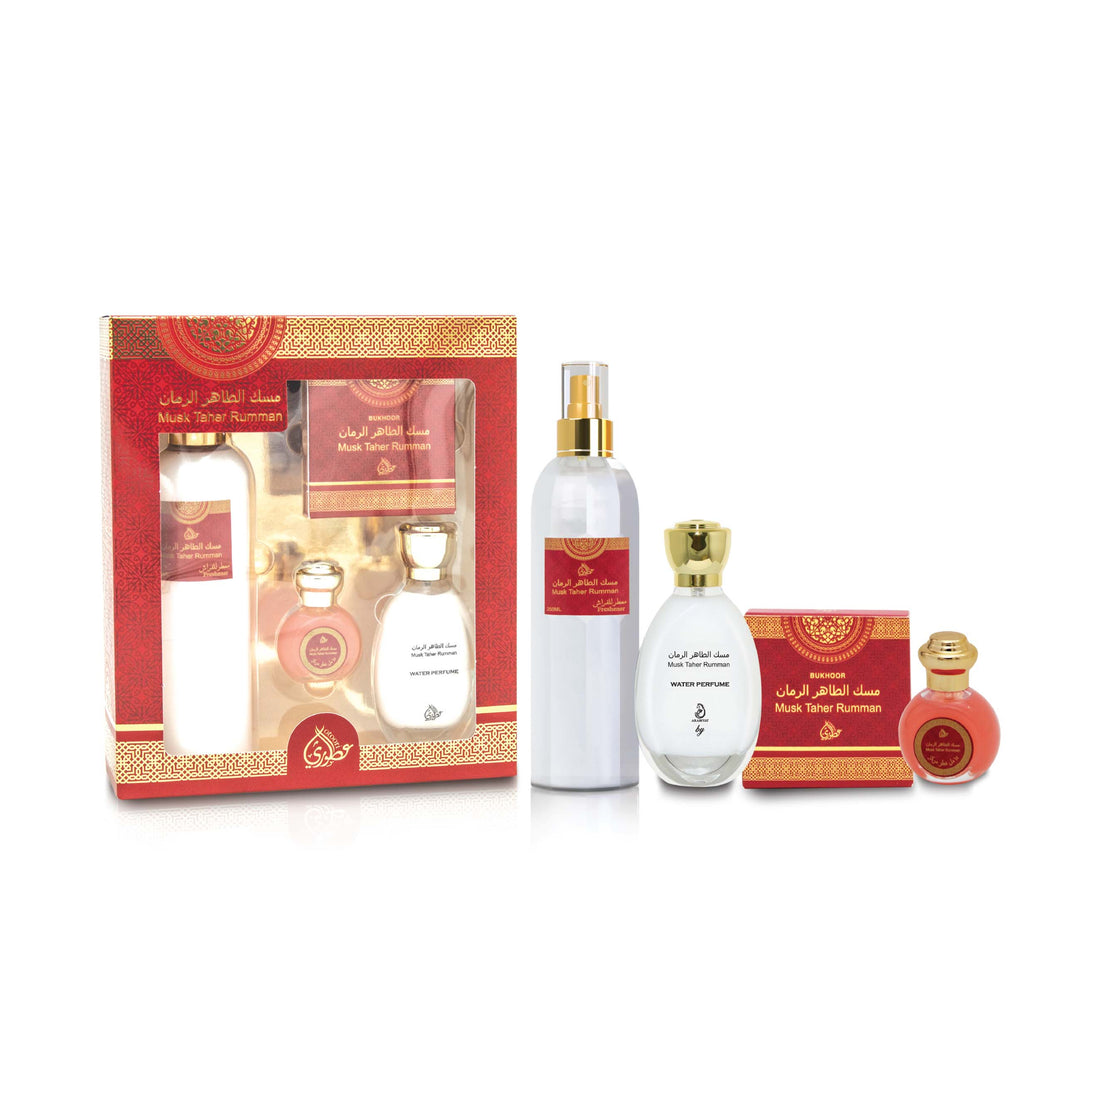 MUSK TAHER ROMAN NON ALCOHOL GIFT SET